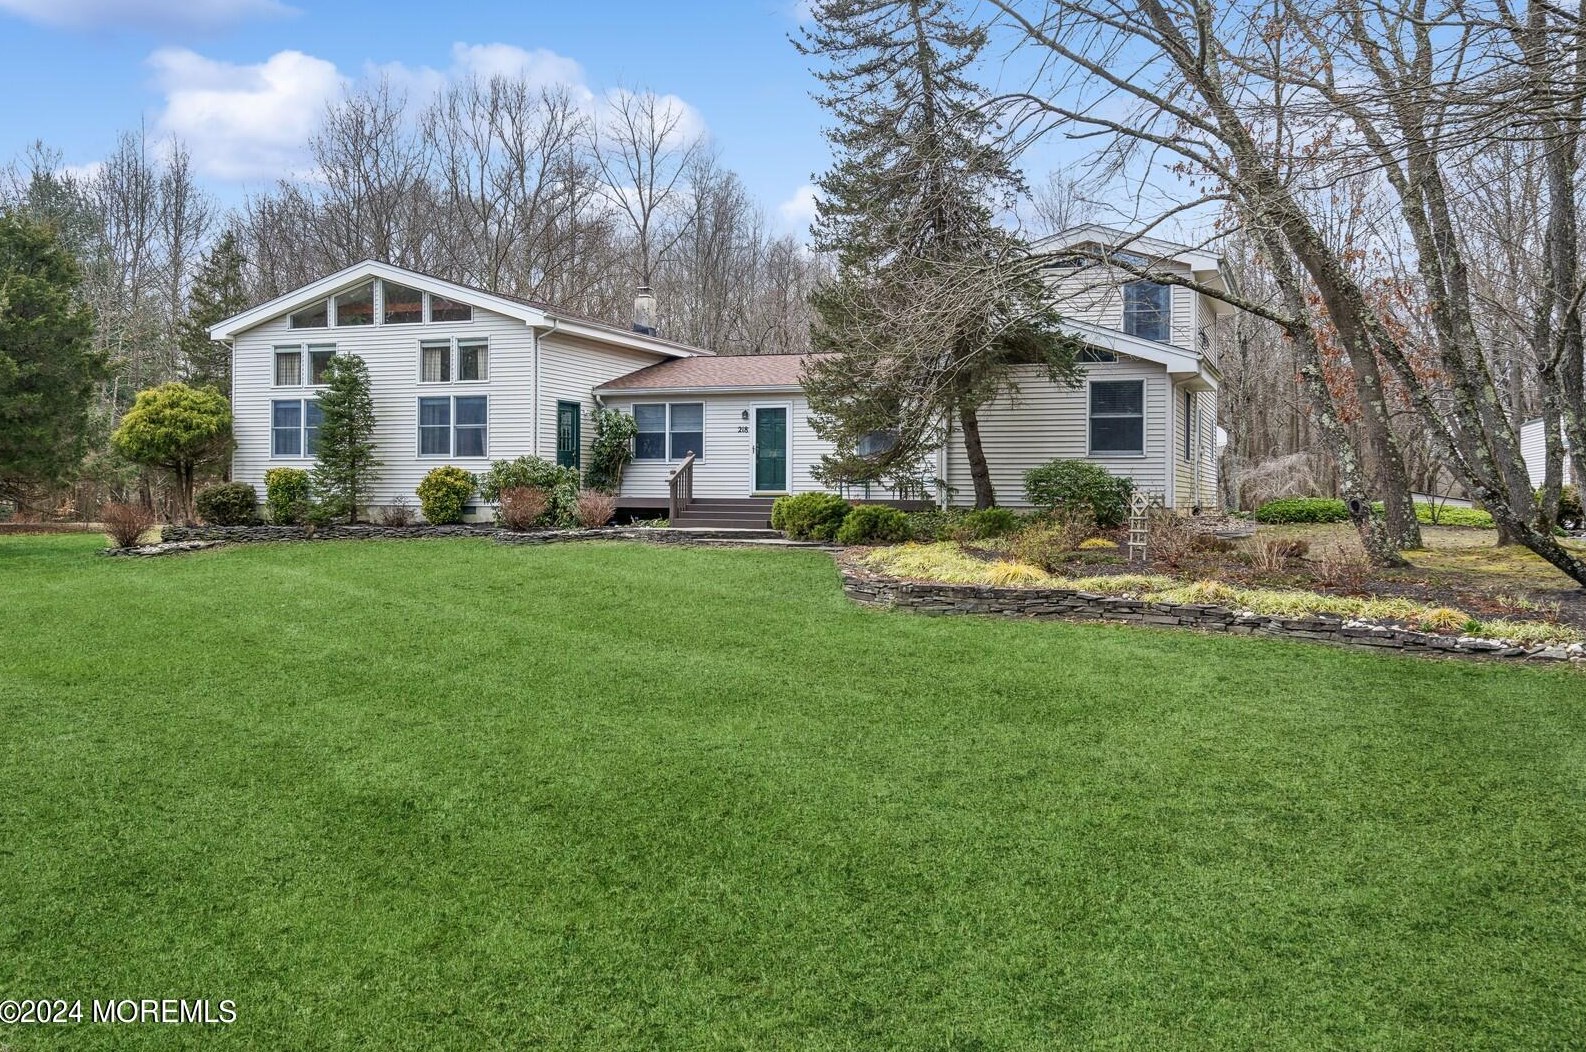 218 Brynmore Rd, Plumsted Township, NJ 08533